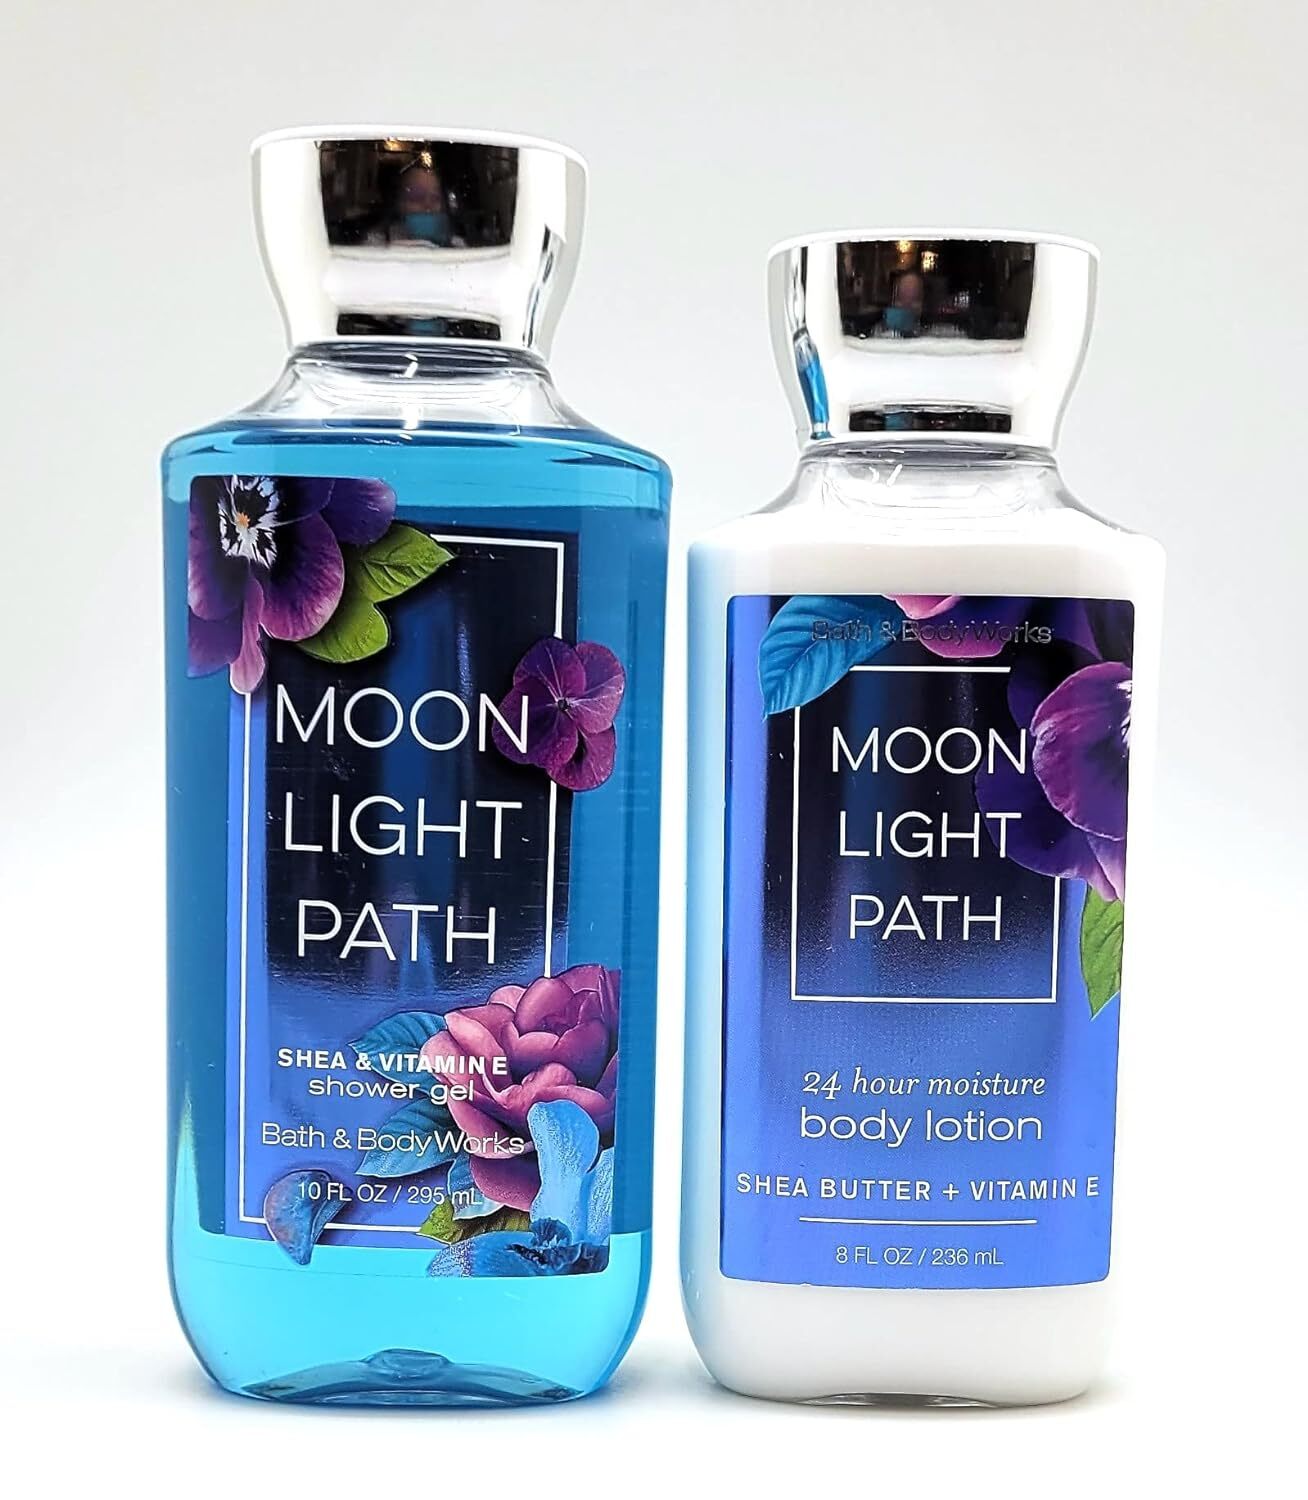 Bath and Body Works Signature Classics Pleasures Collection Body Lotion and Shower Gel Gift Set Men or Women (Moonlight Path)